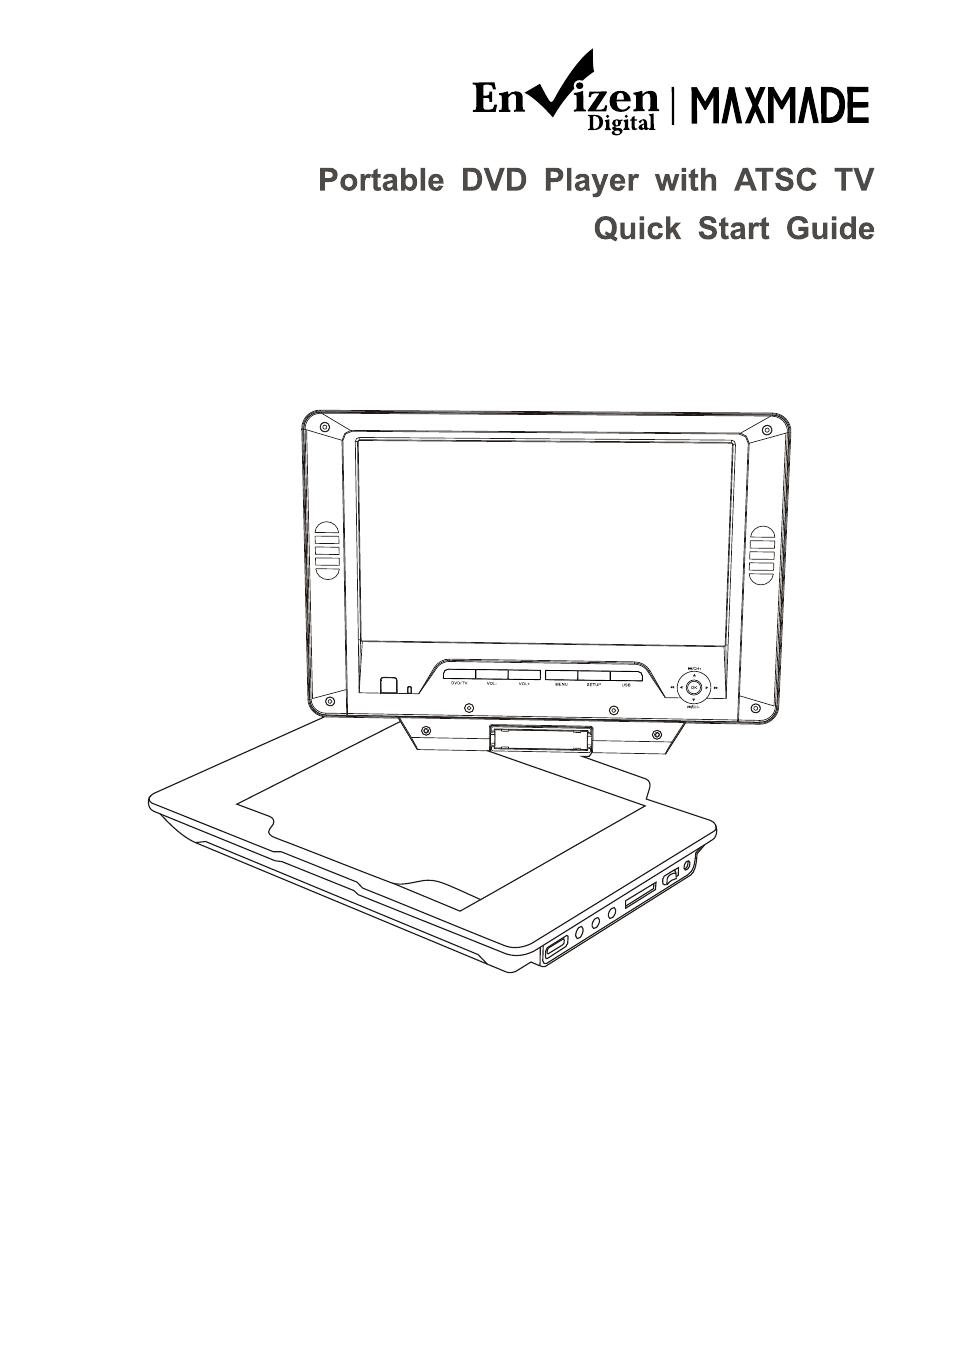 ED8890A Quick Start Guide